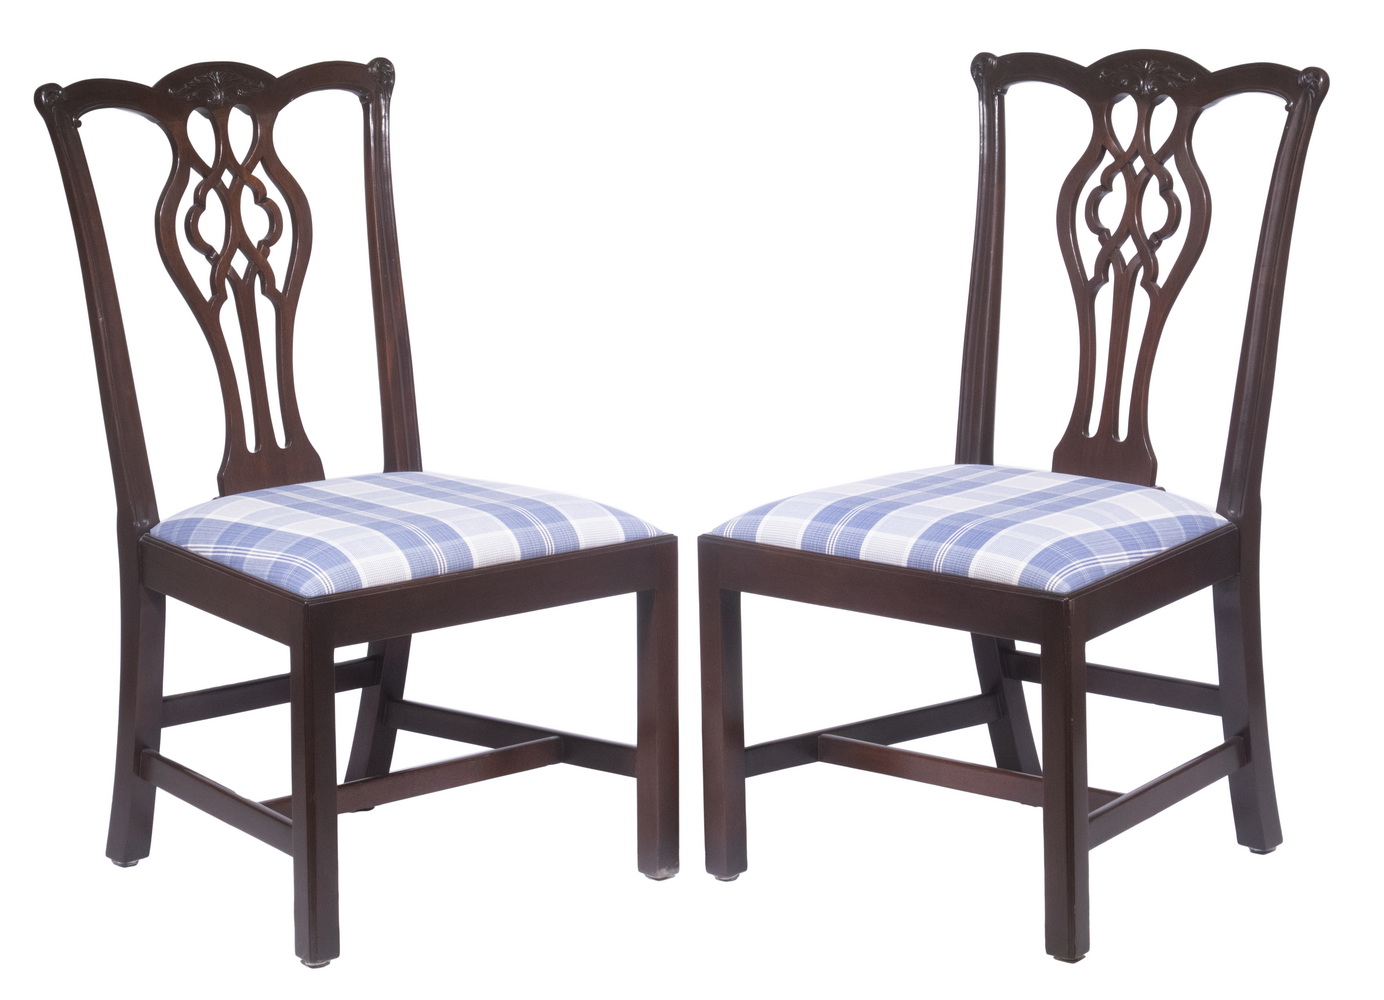 PAIR OF CHIPPENDALE STYLE SIDE 3b64e6